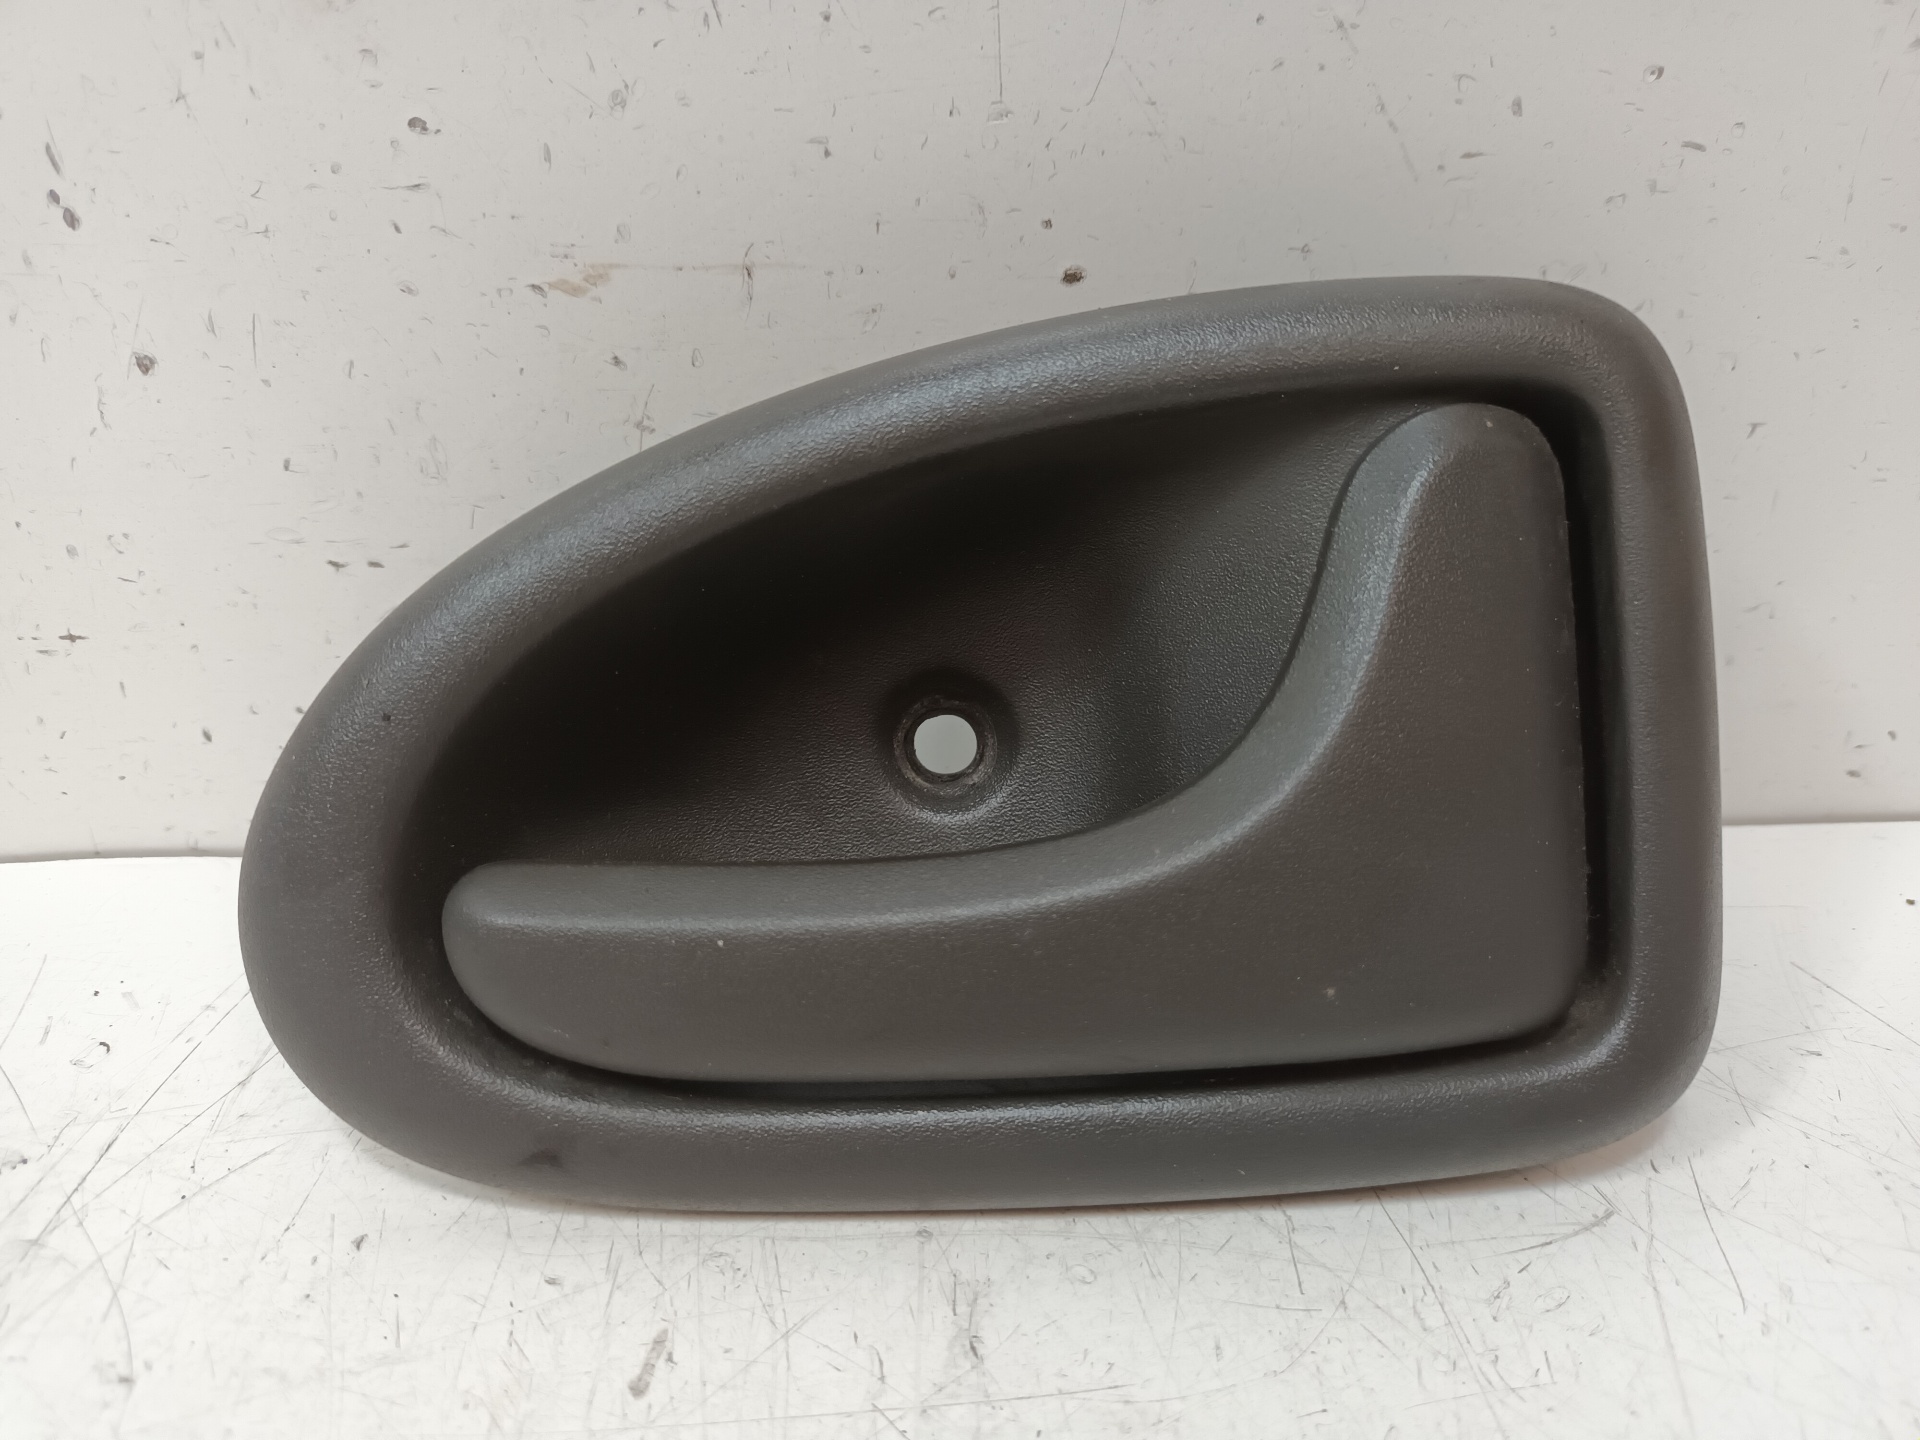 RENAULT Scenic 1 generation (1996-2003) Other Interior Parts 7700415975 24537964